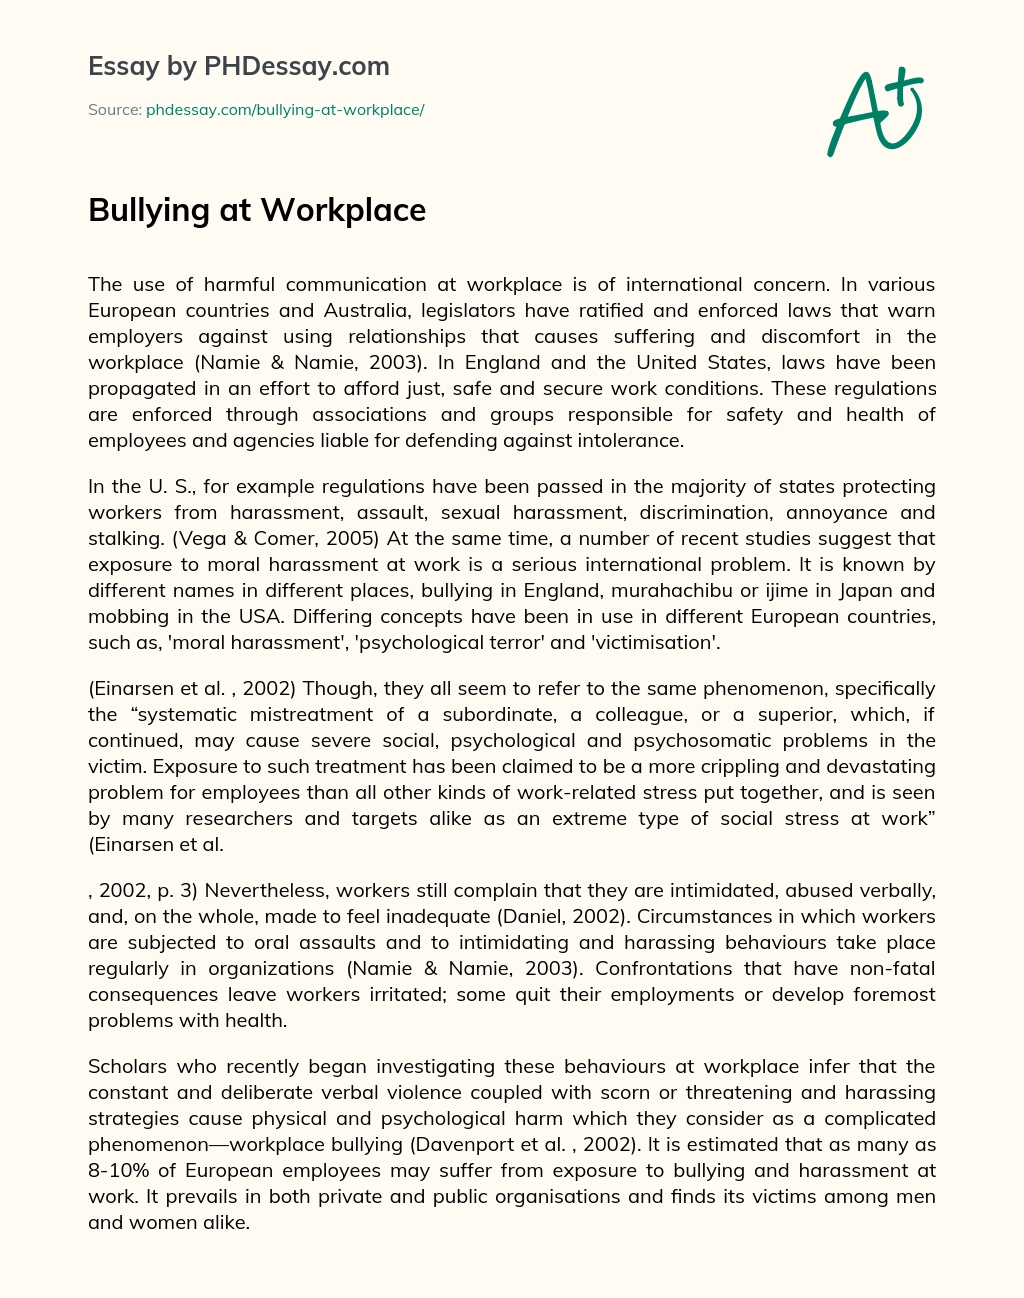 Bullying at Workplace essay